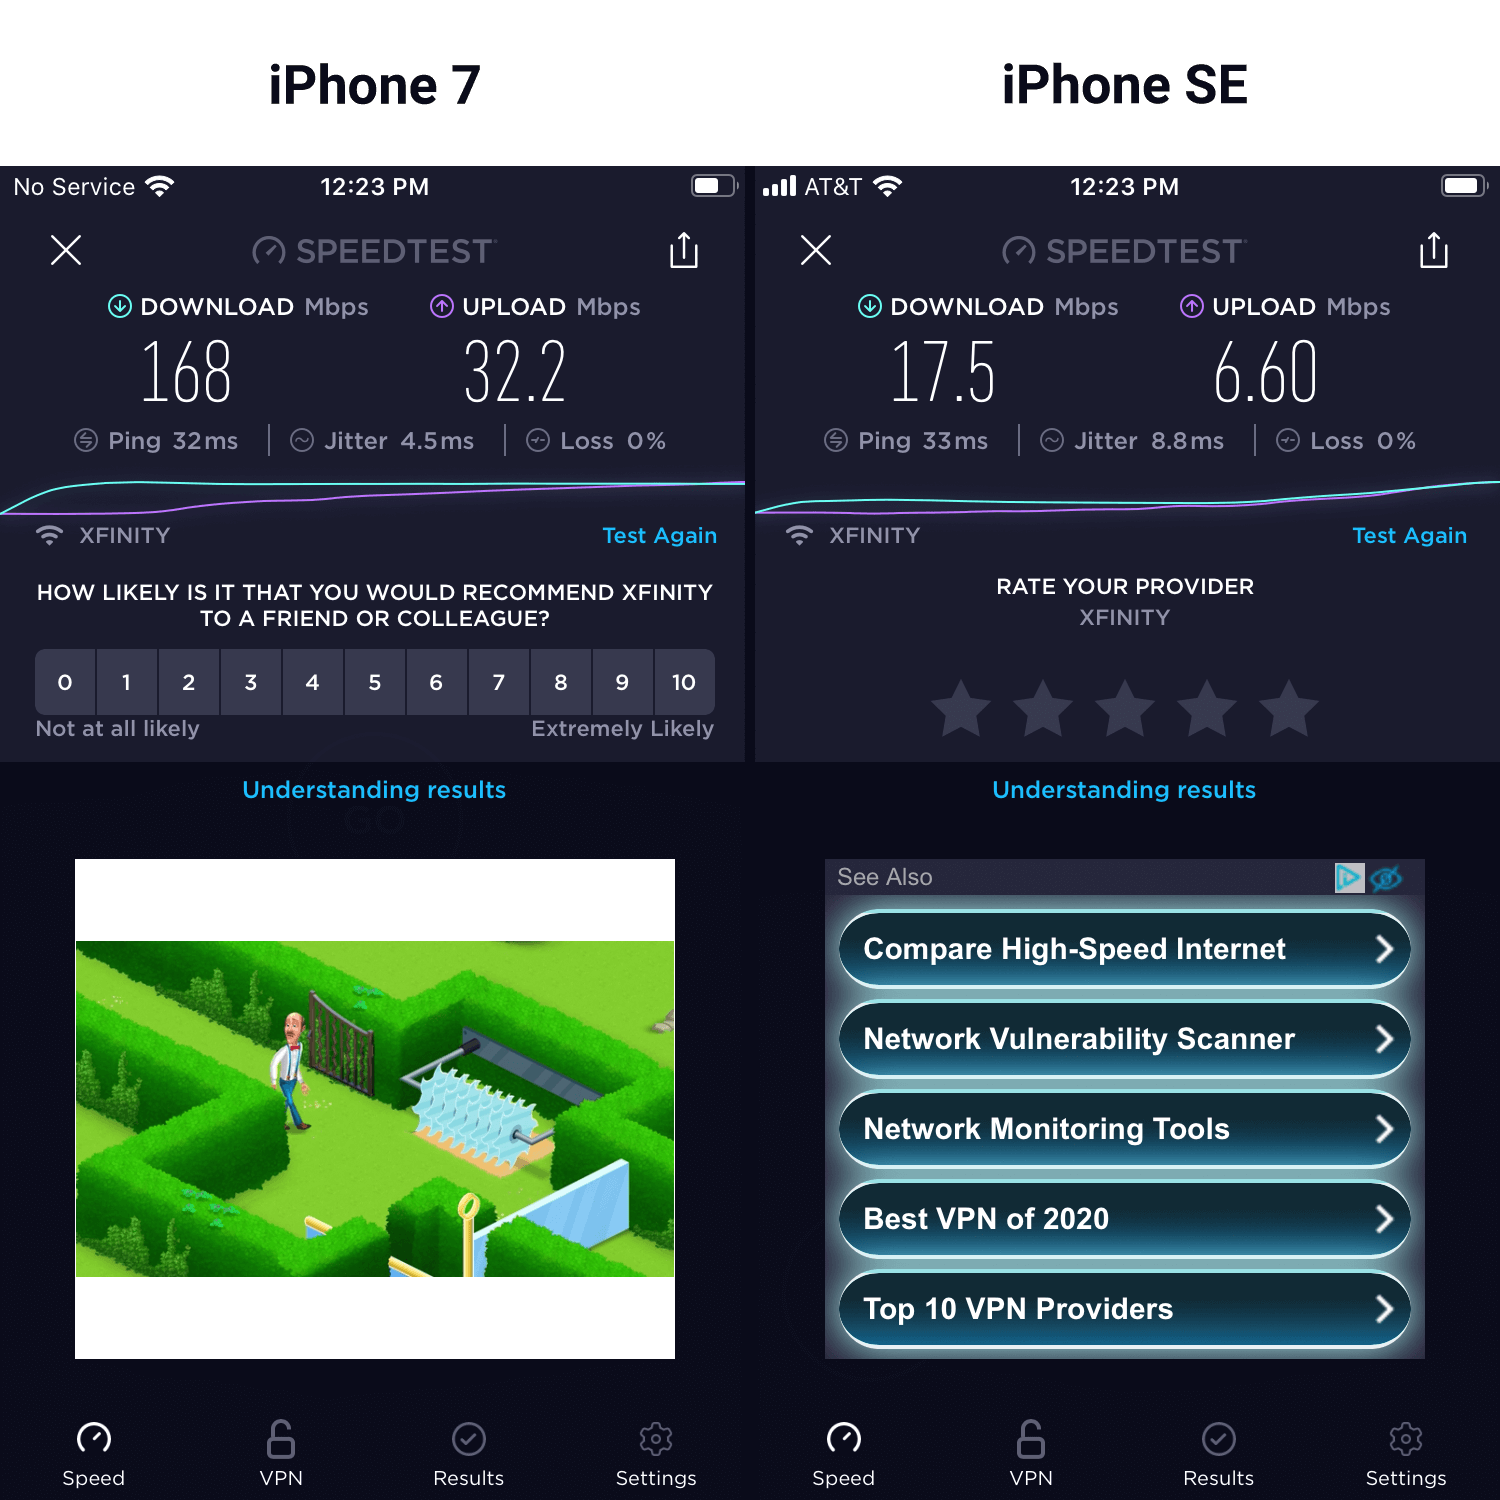 RAX200 speeds on iPhone7 and iPhone SE